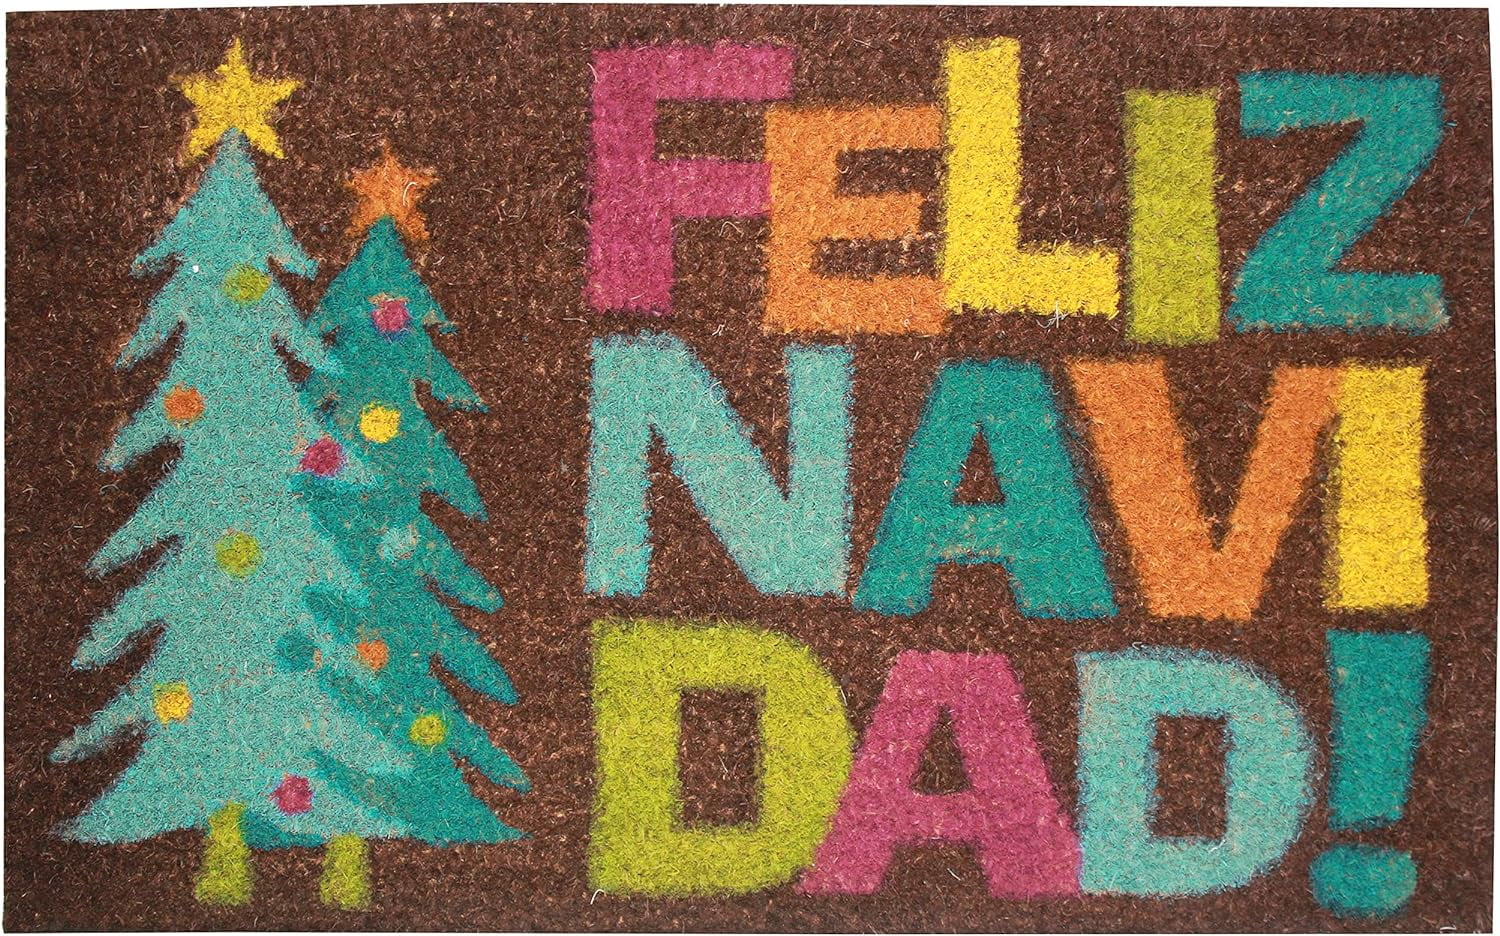 Holiday Coir Doormat 18x28 Christmas Welcome Mat Wonderland Collection - 18x28 - Gnomes